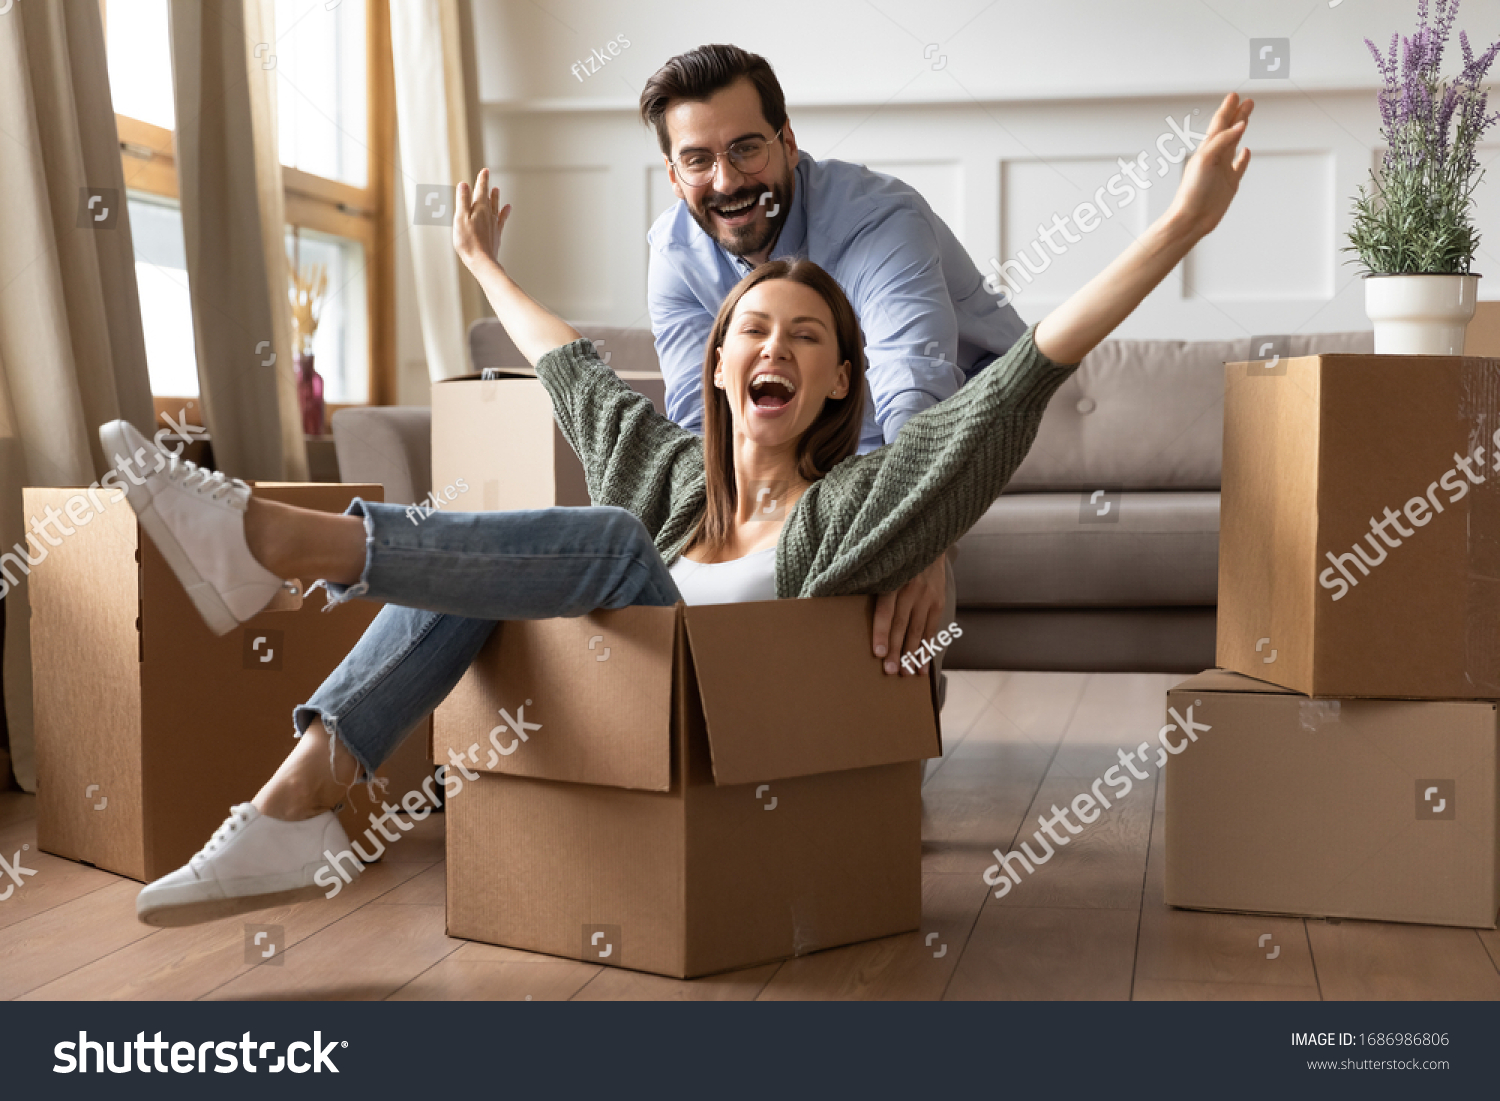 Full length overjoyed young bearded man in glasses pushing laughing wife in carton box. Energetic happy woman sitting in carboard container, having fun with smiling husband in new apartment house. #1686986806